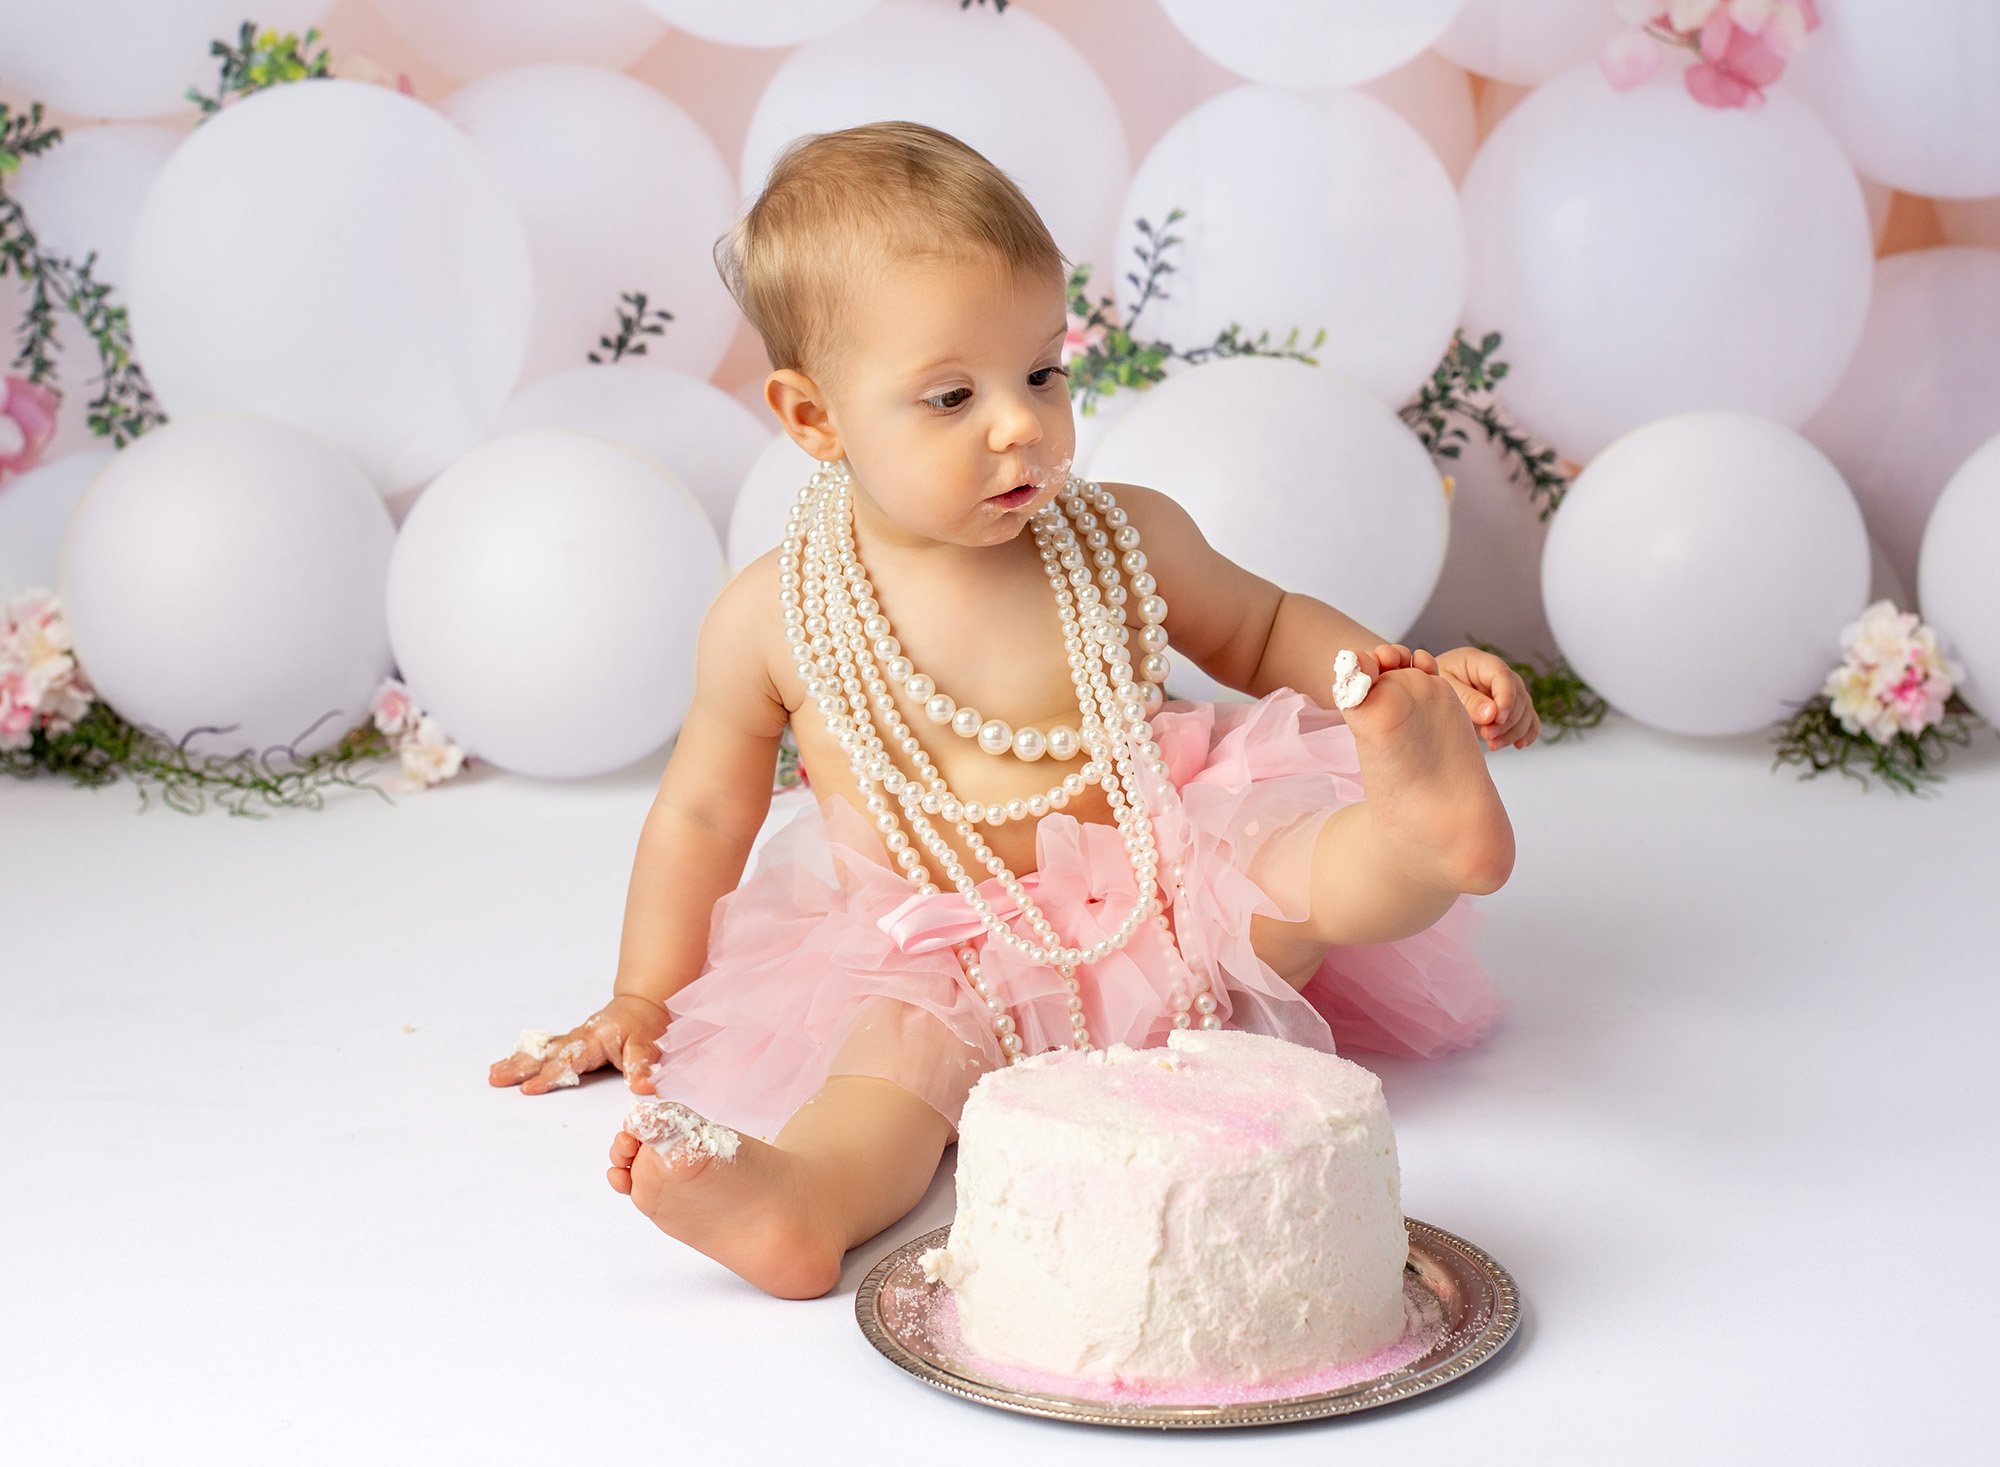 1 year baby photoshoot baby girl wearing layered pearl necklace and pink tutu sitting in front of cake holding up foot with frosting on toe with white balloons in background